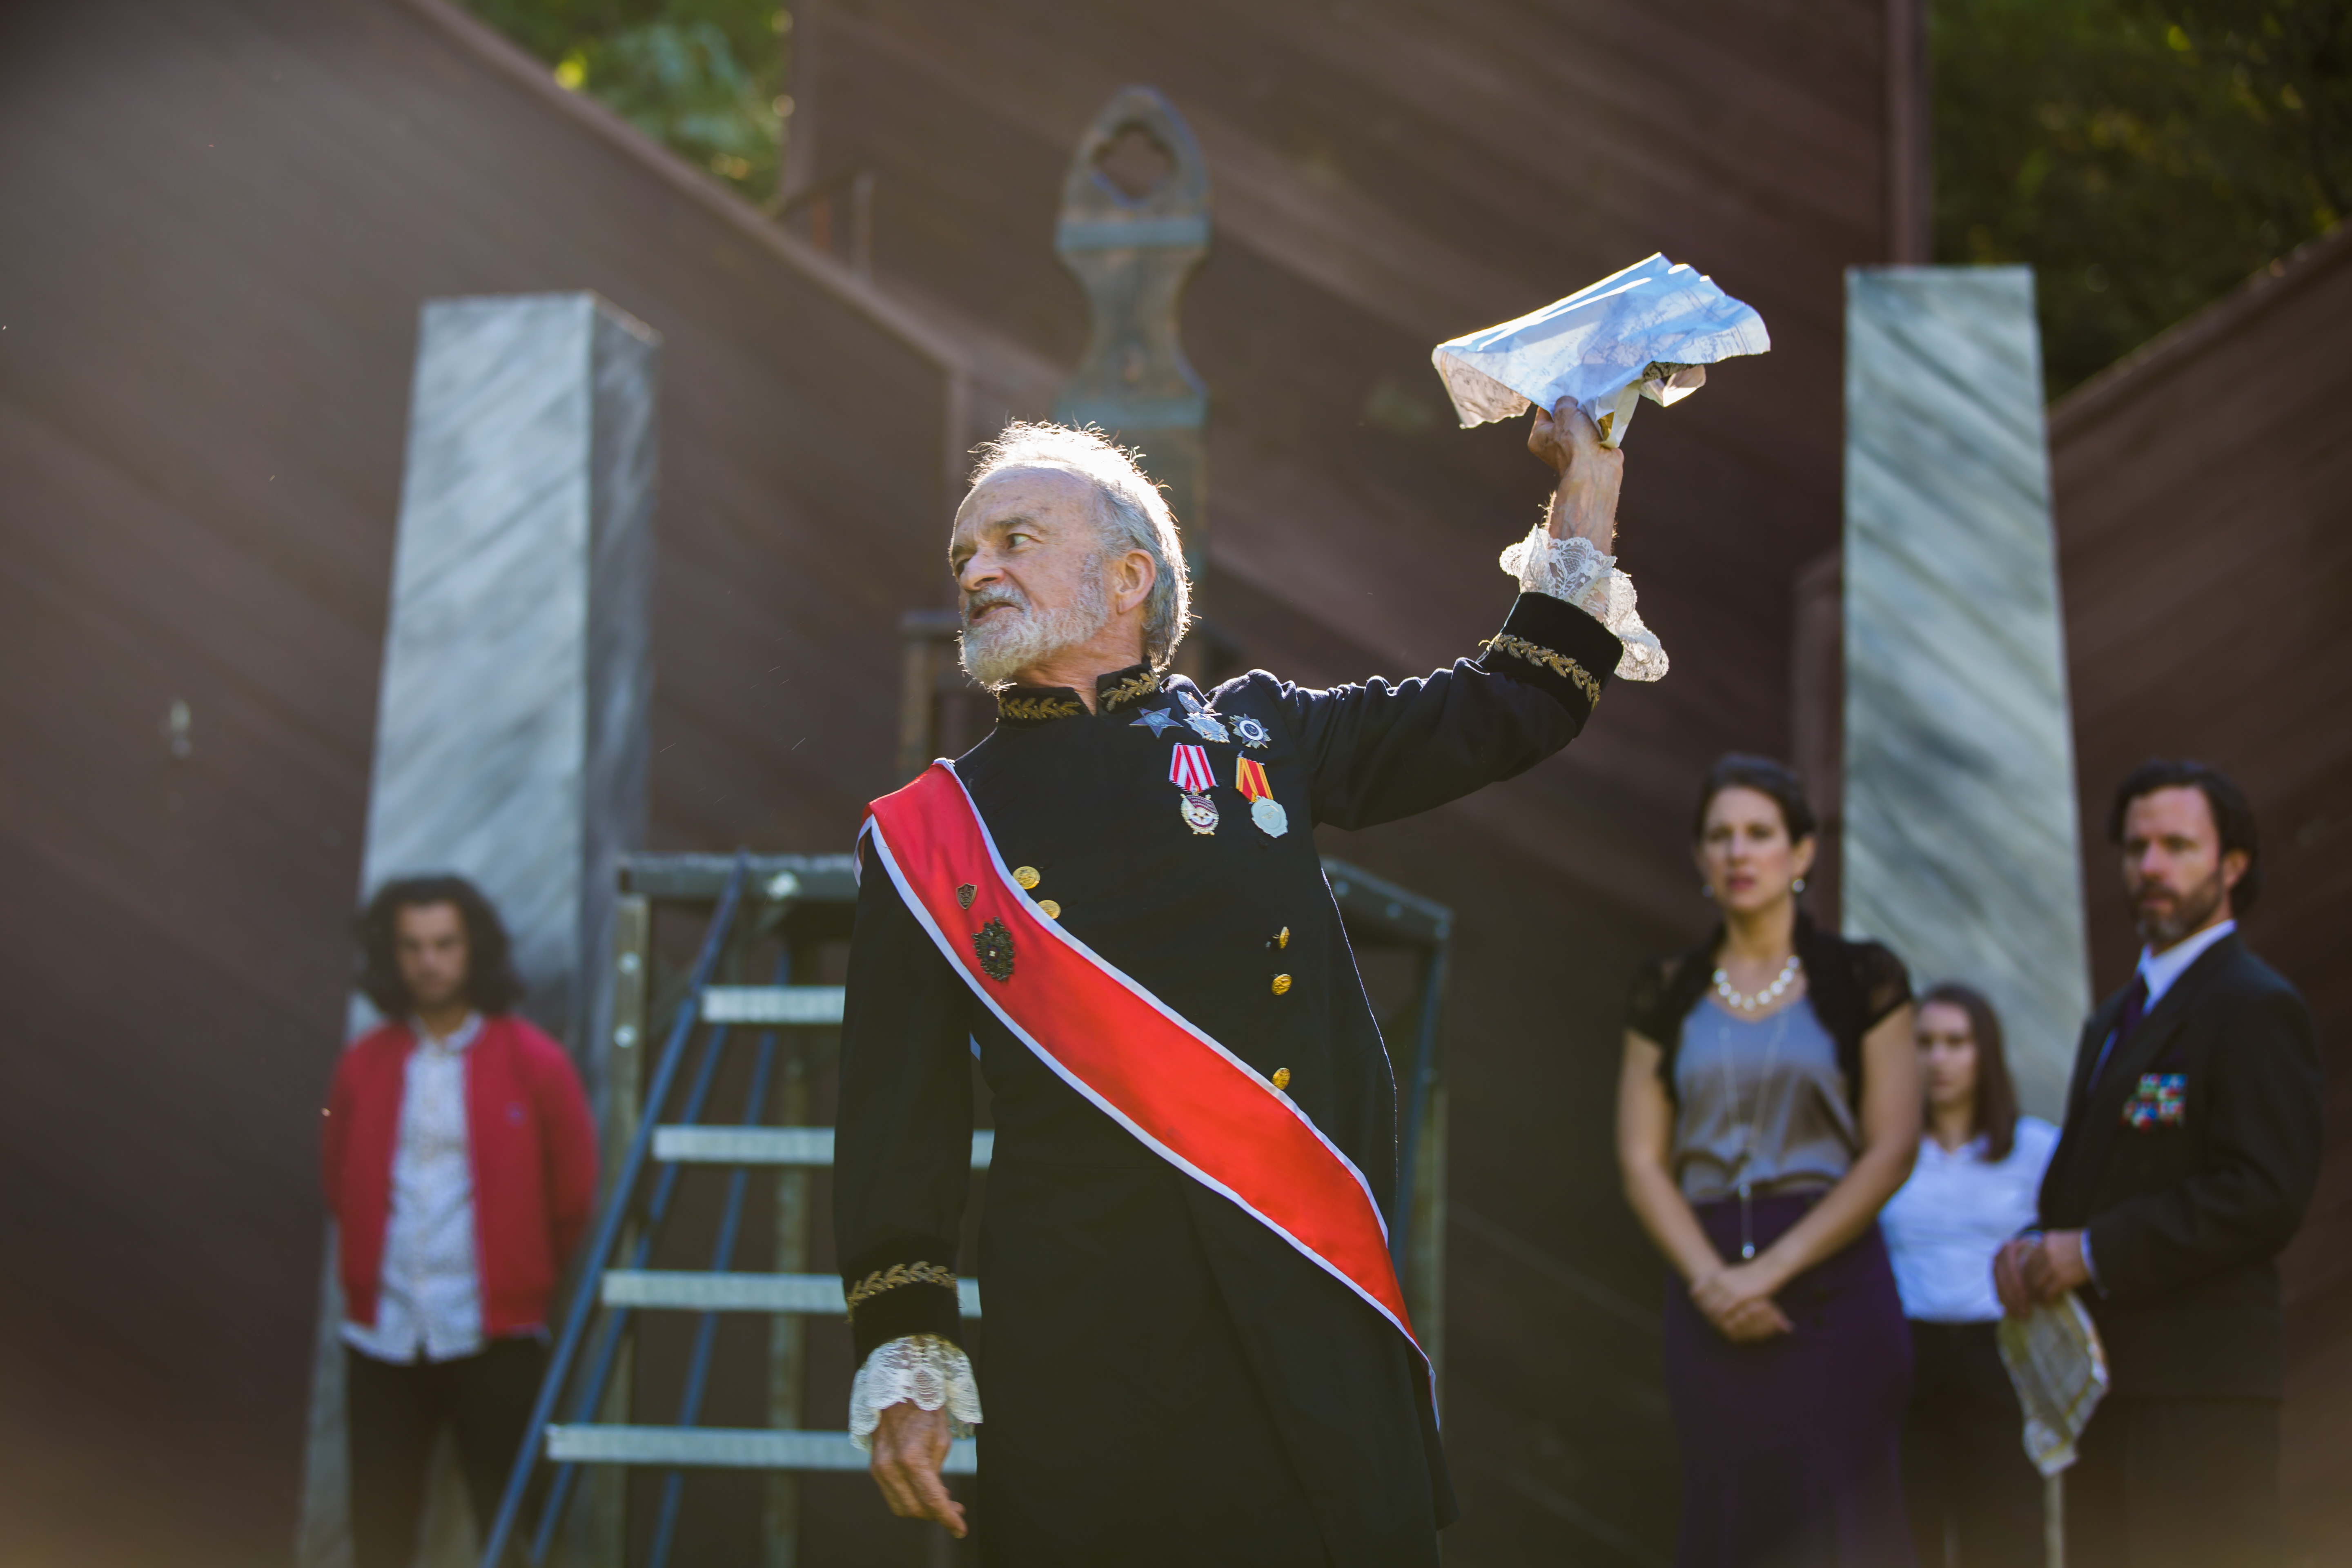 David Pichette as King Lear (photo by HMMM Productions)